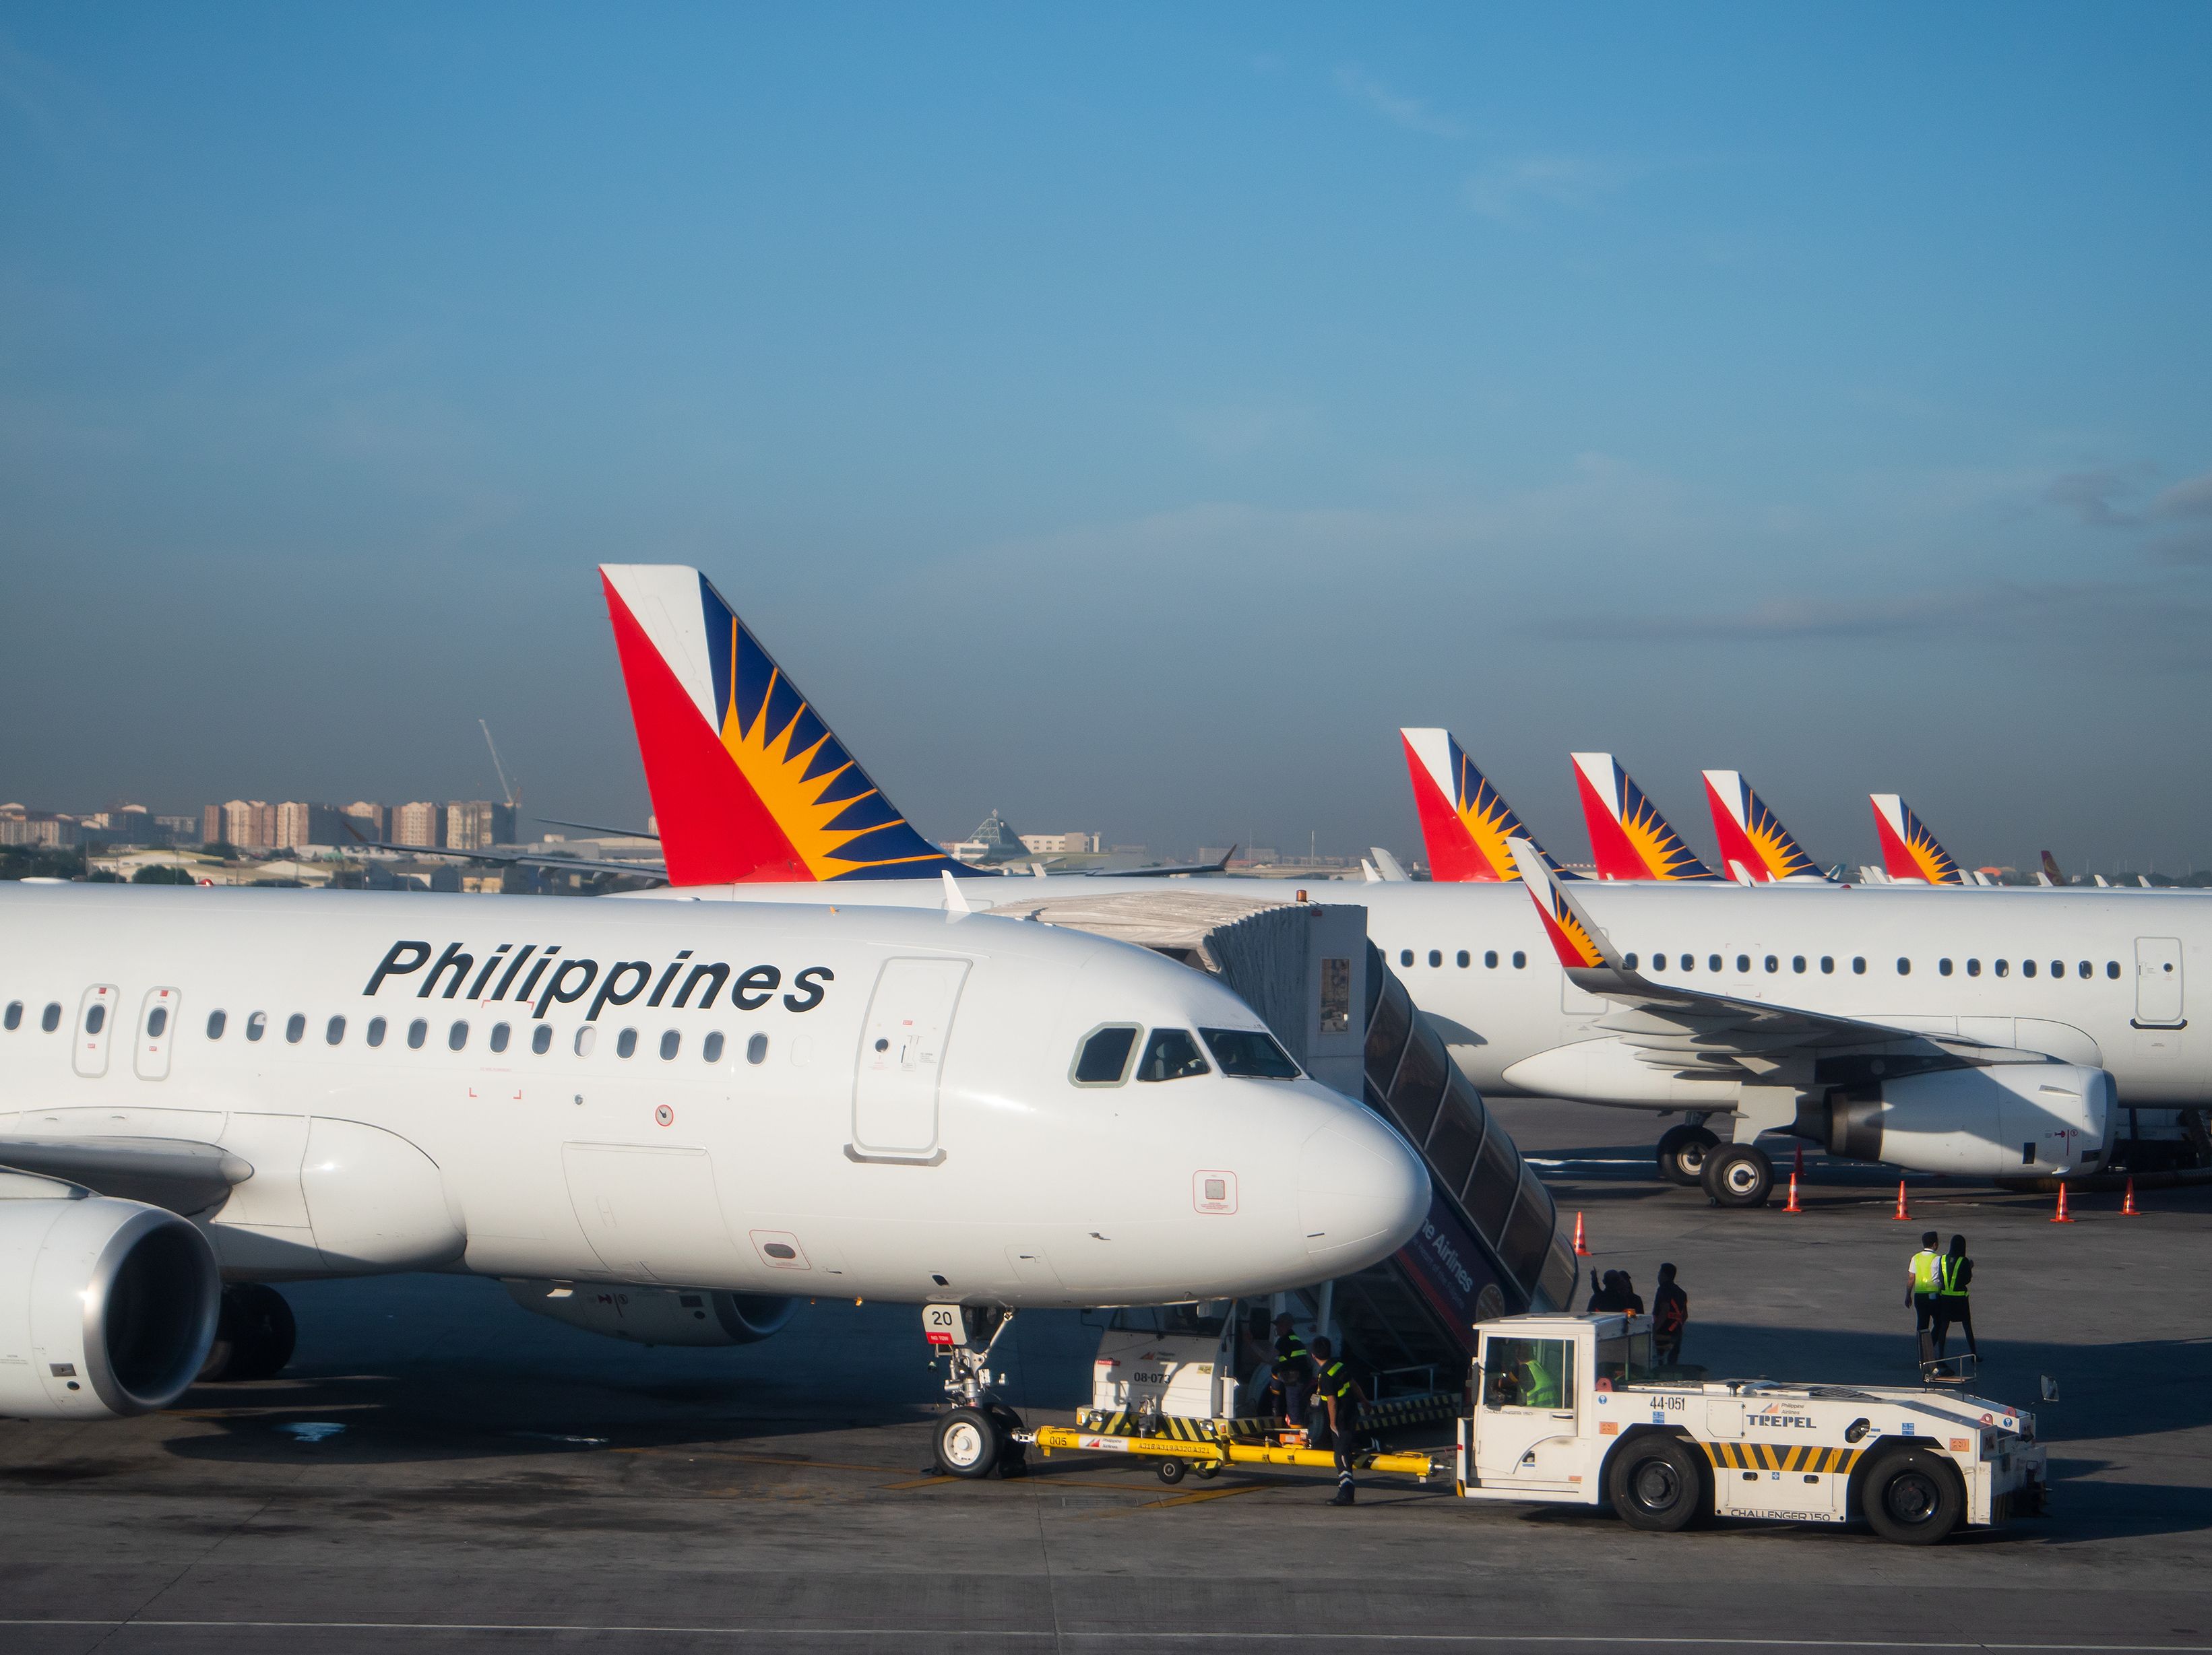 Phillippine airlines at gate